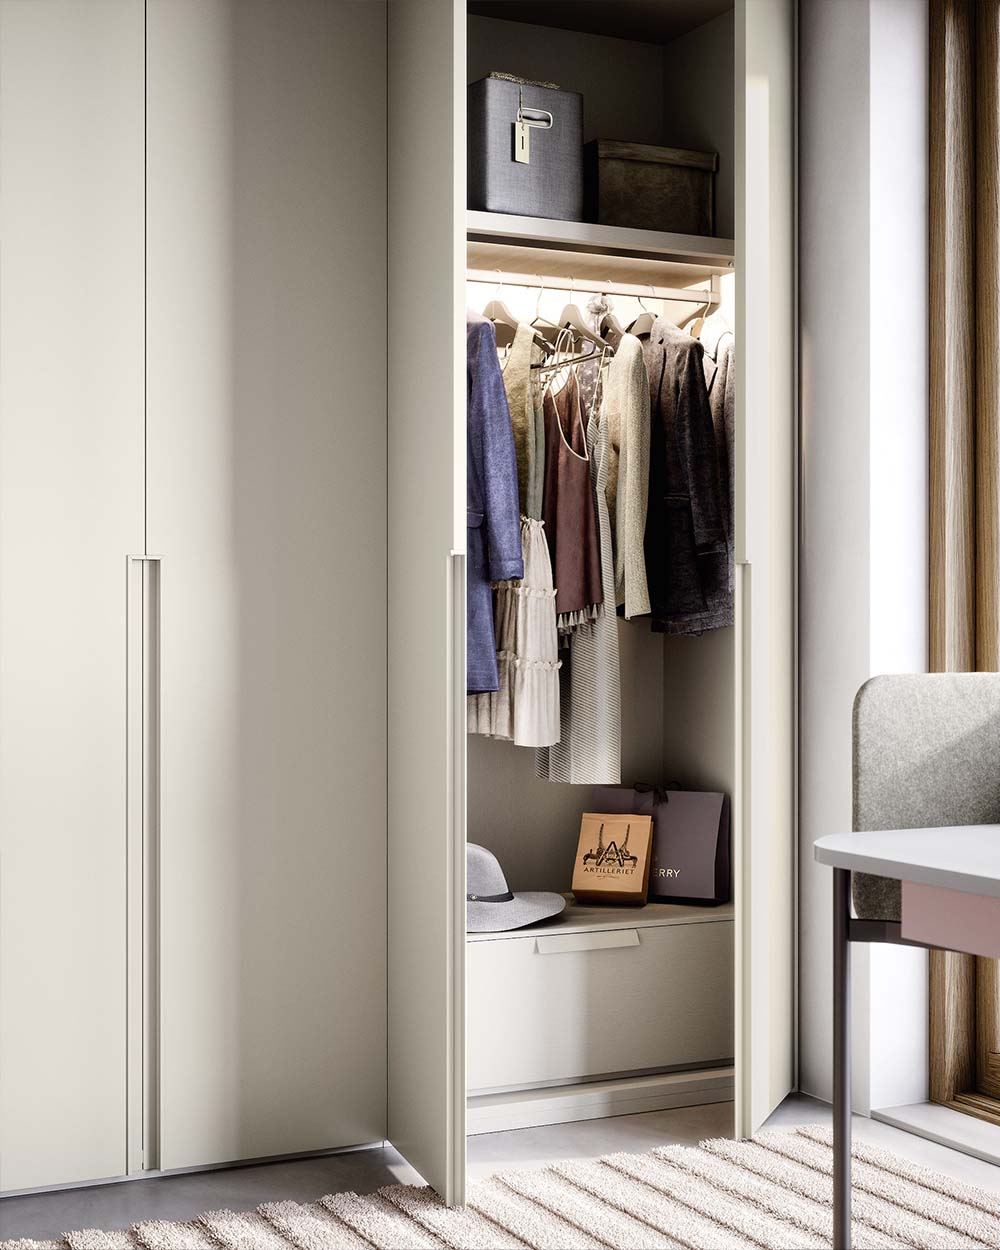 Luxury modern hinged wardrobe. Designed and fitted in your home by Krieder.